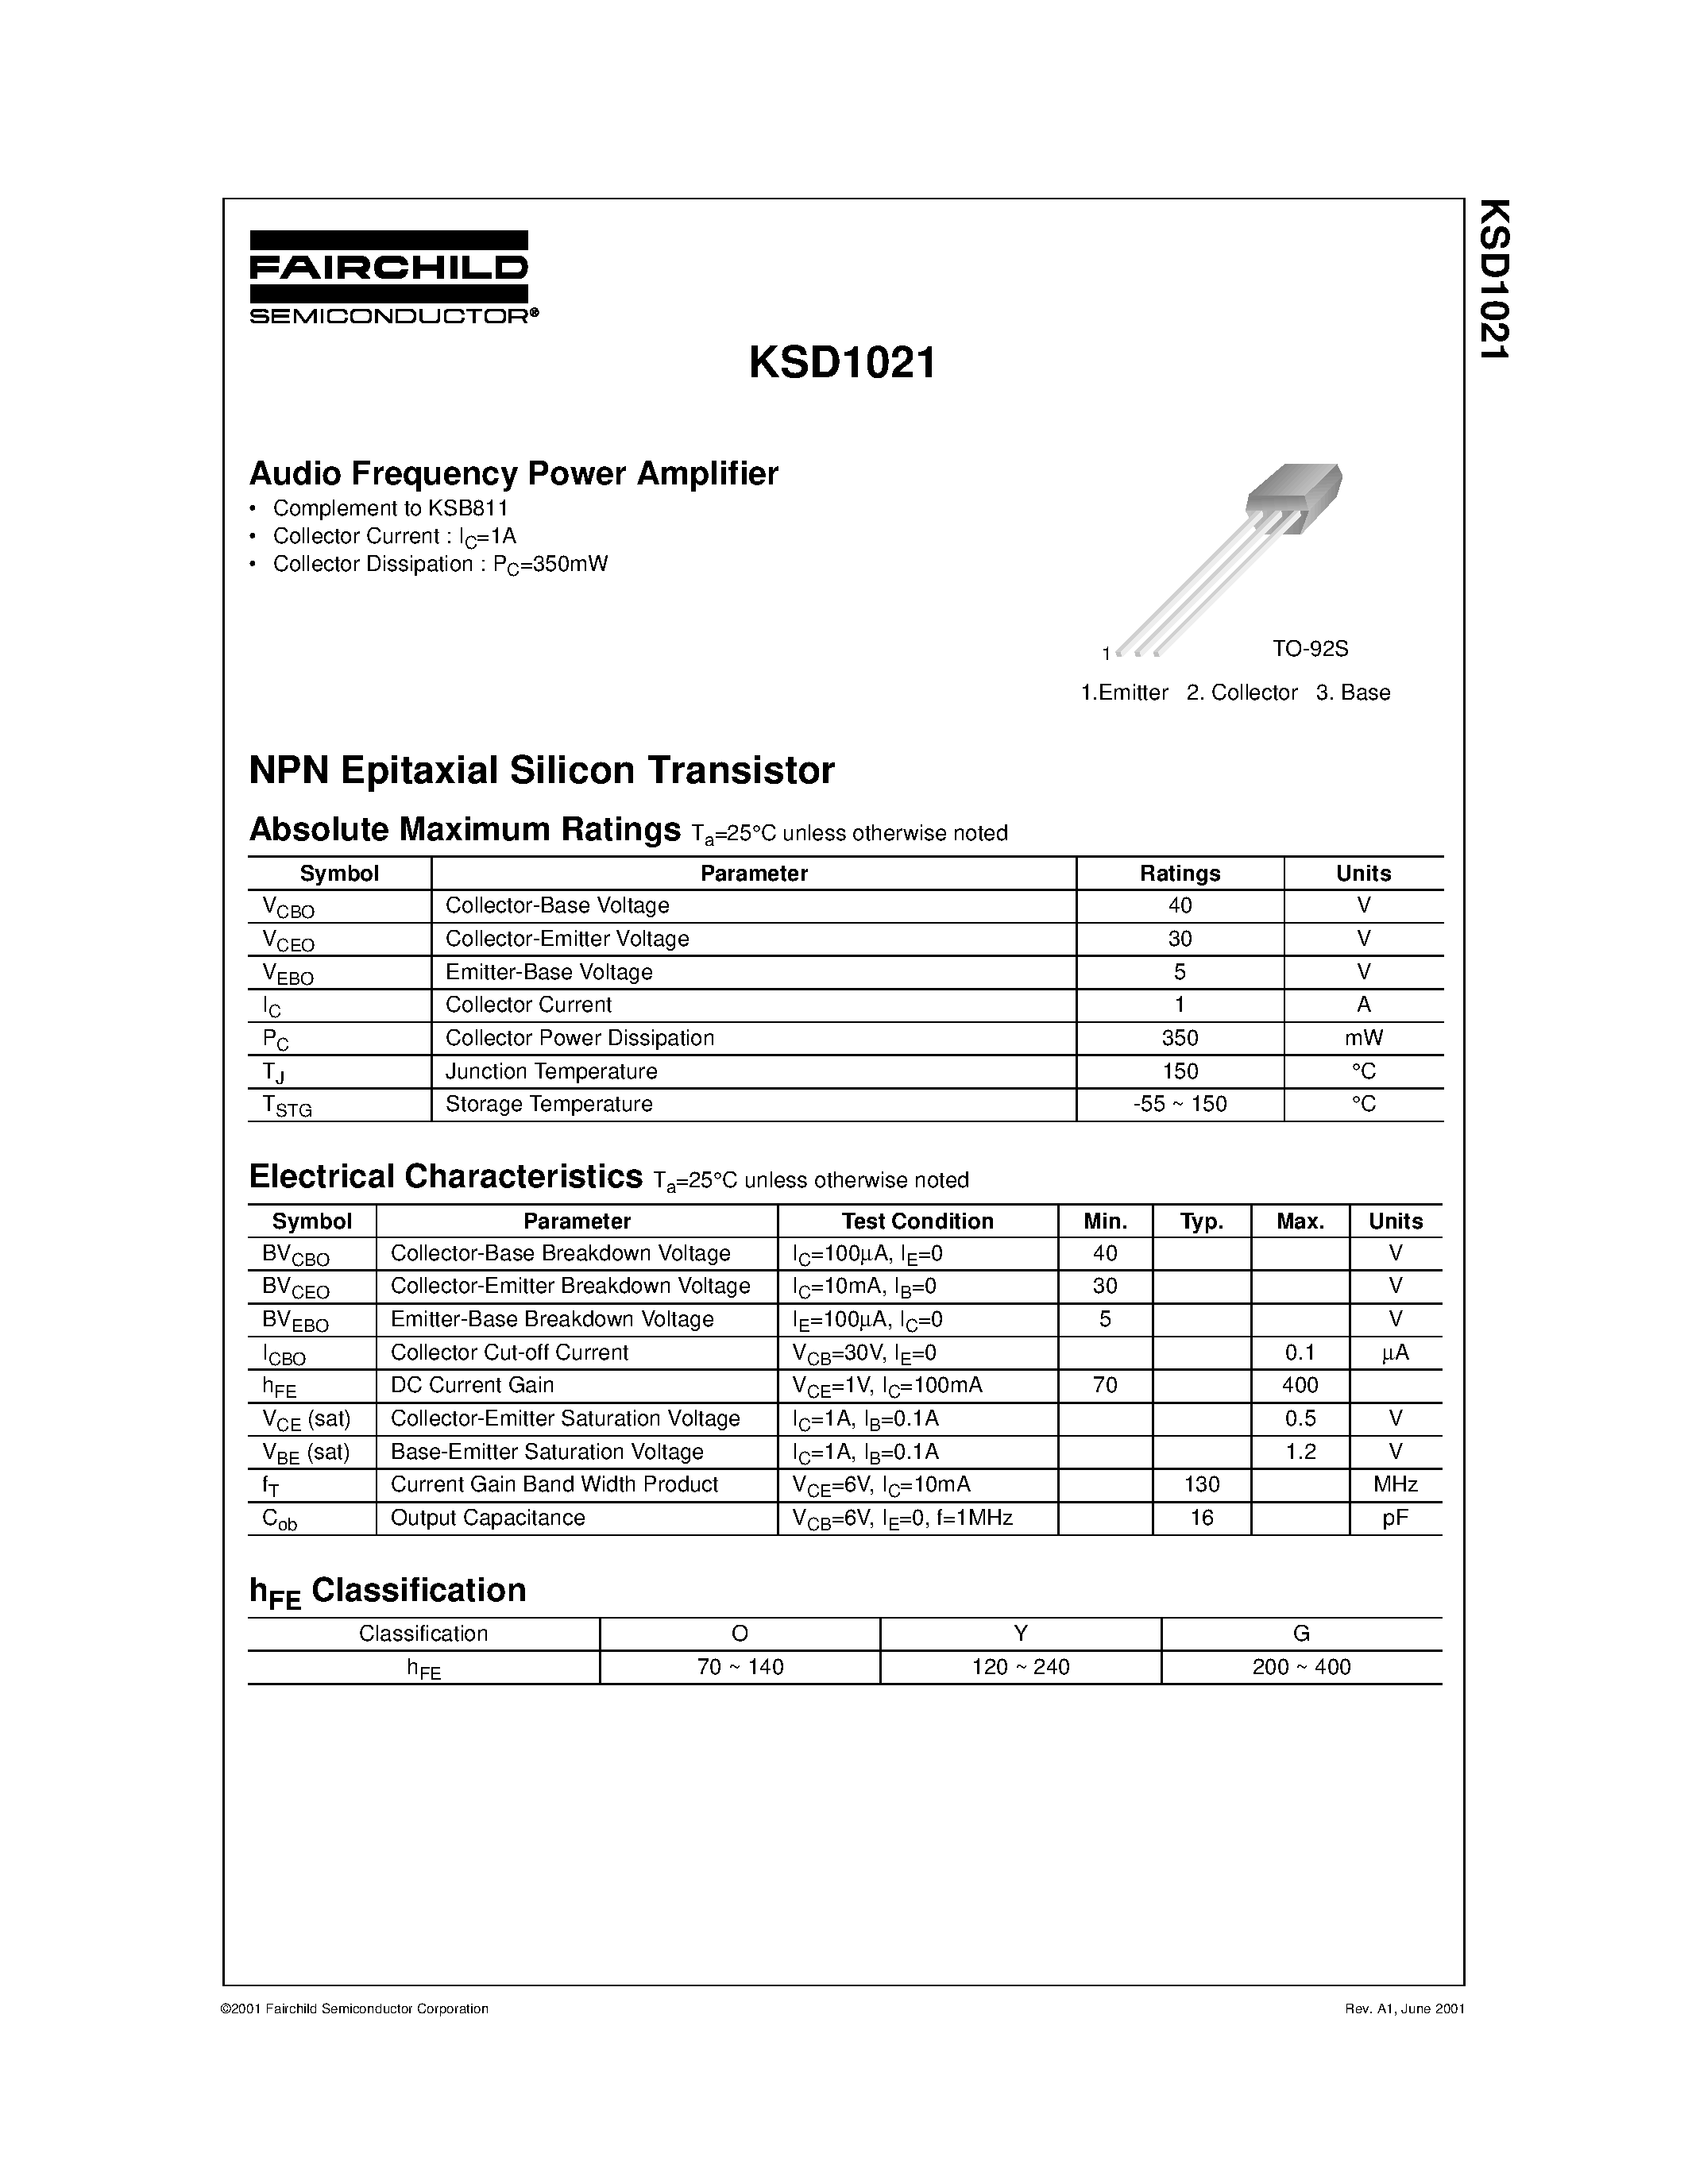 Datasheet KSD1021 - Audio Frequency Power Amplifier page 1